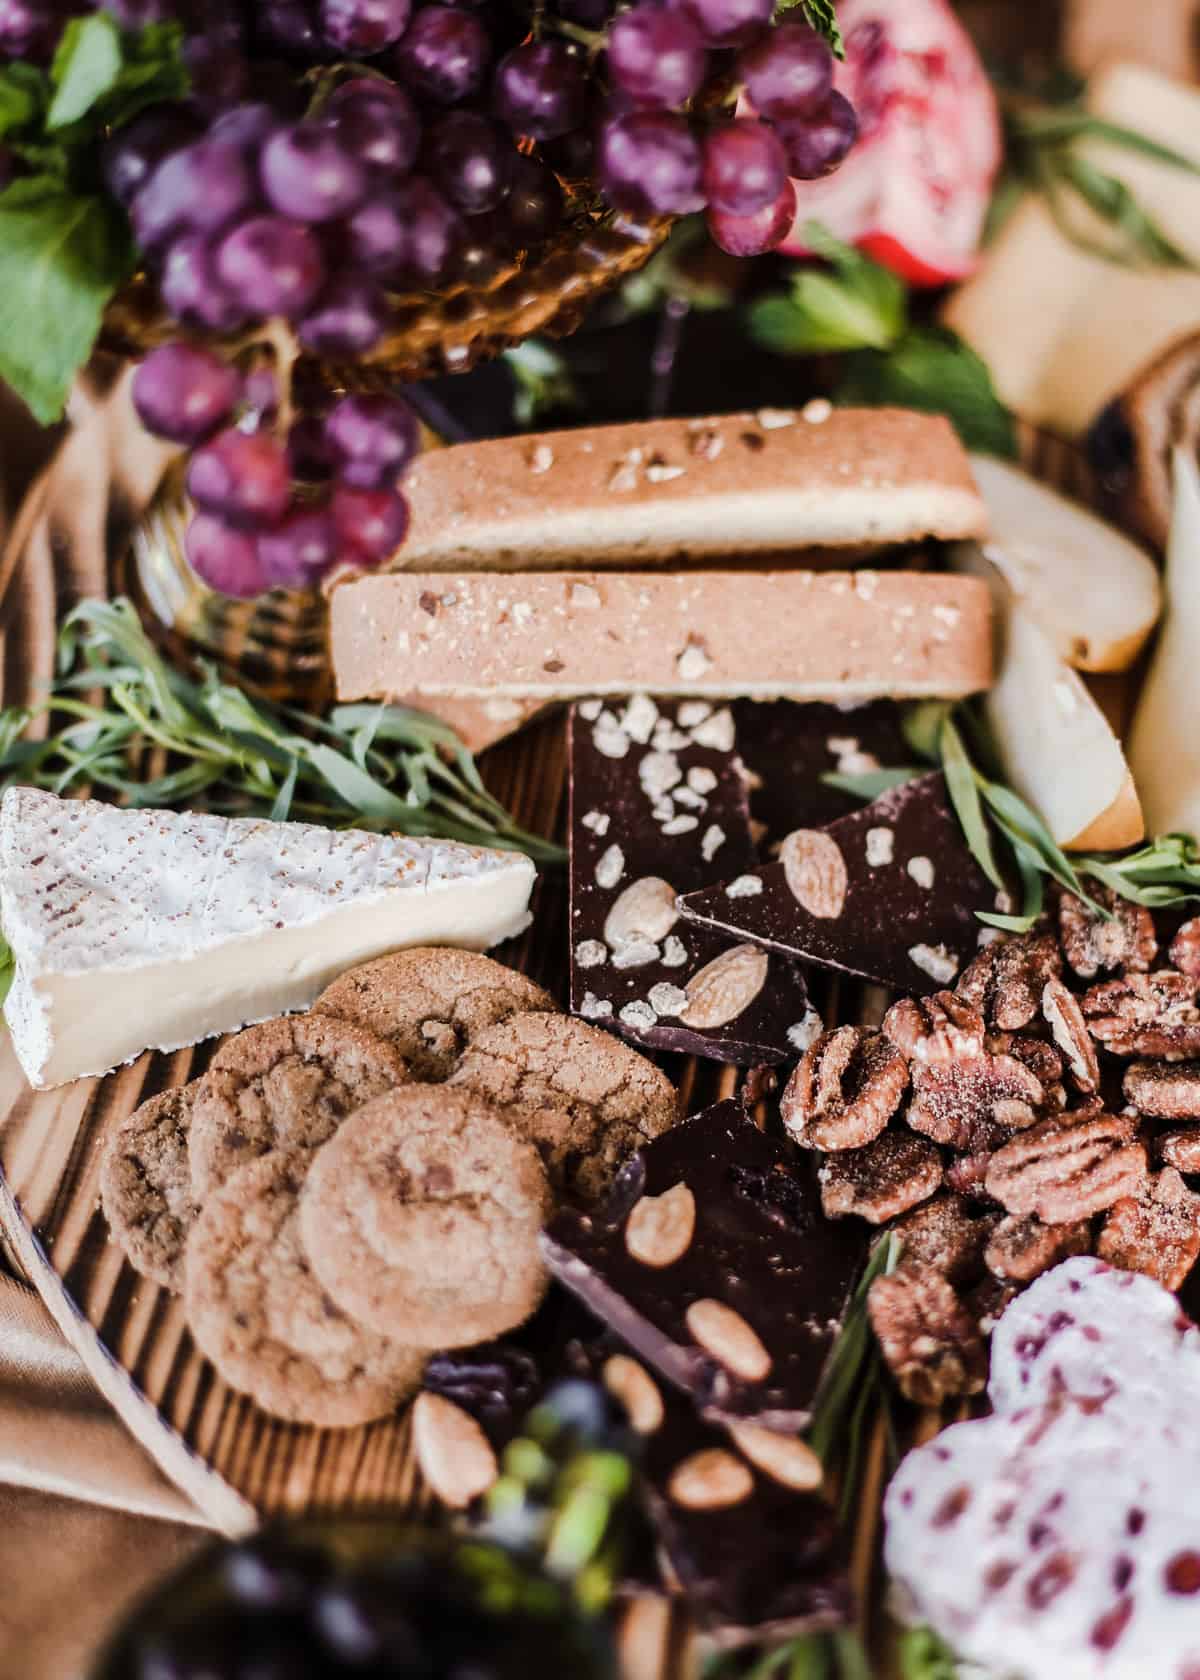 brie, biscotti, chocolates, cookies, and nuts on wood board.